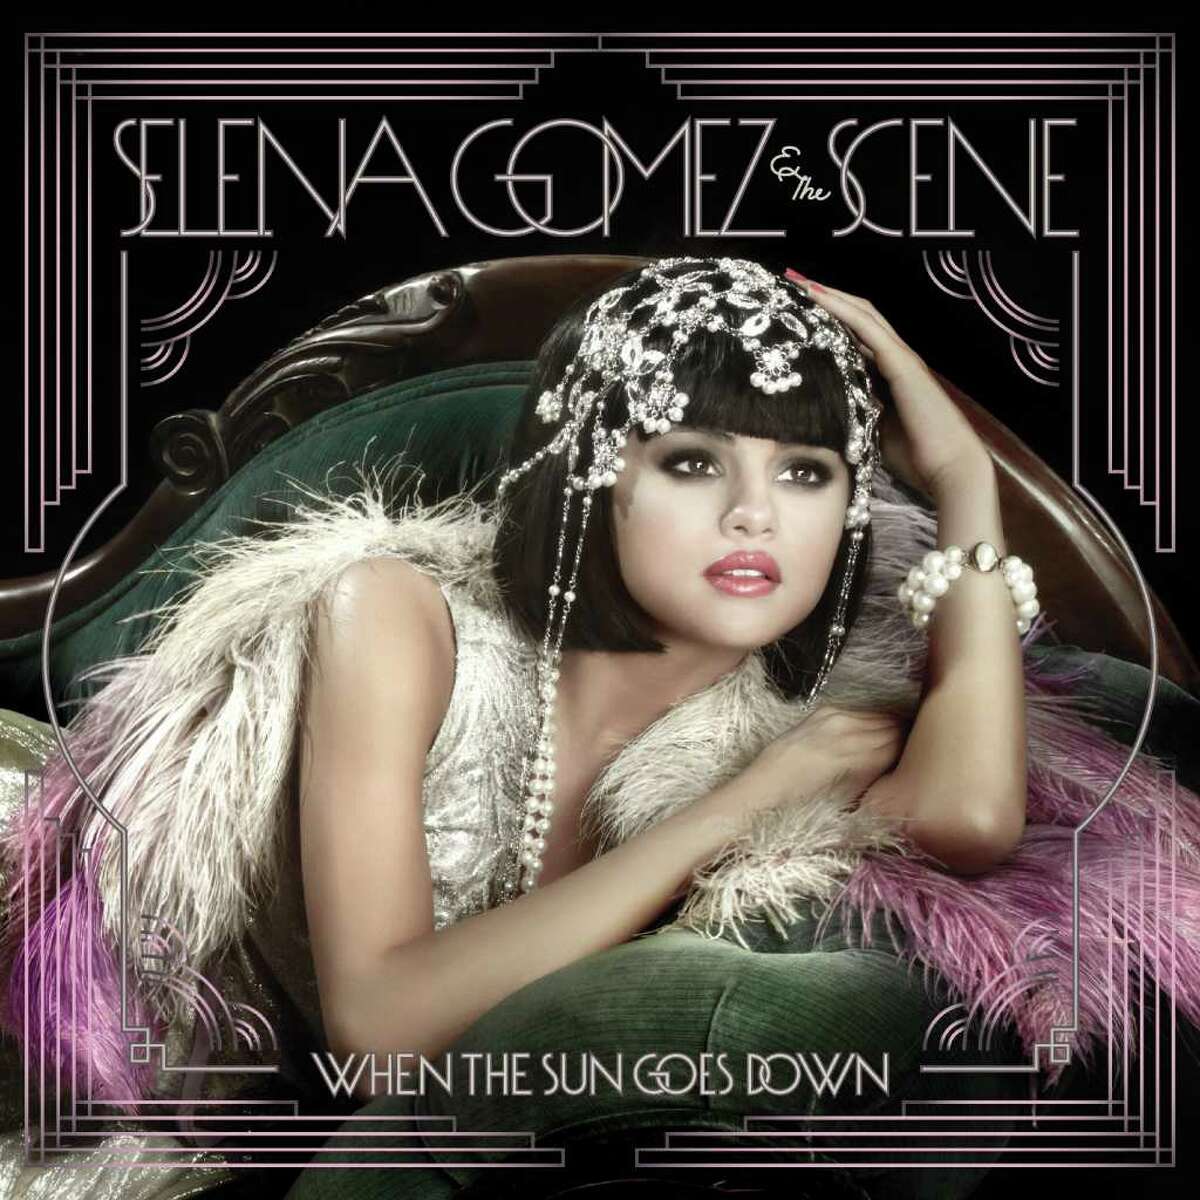 In this CD cover image released by Hollywood Records, the latest release by Selena Gomez & the Scene, "When the Sun Goes Down," is shown.